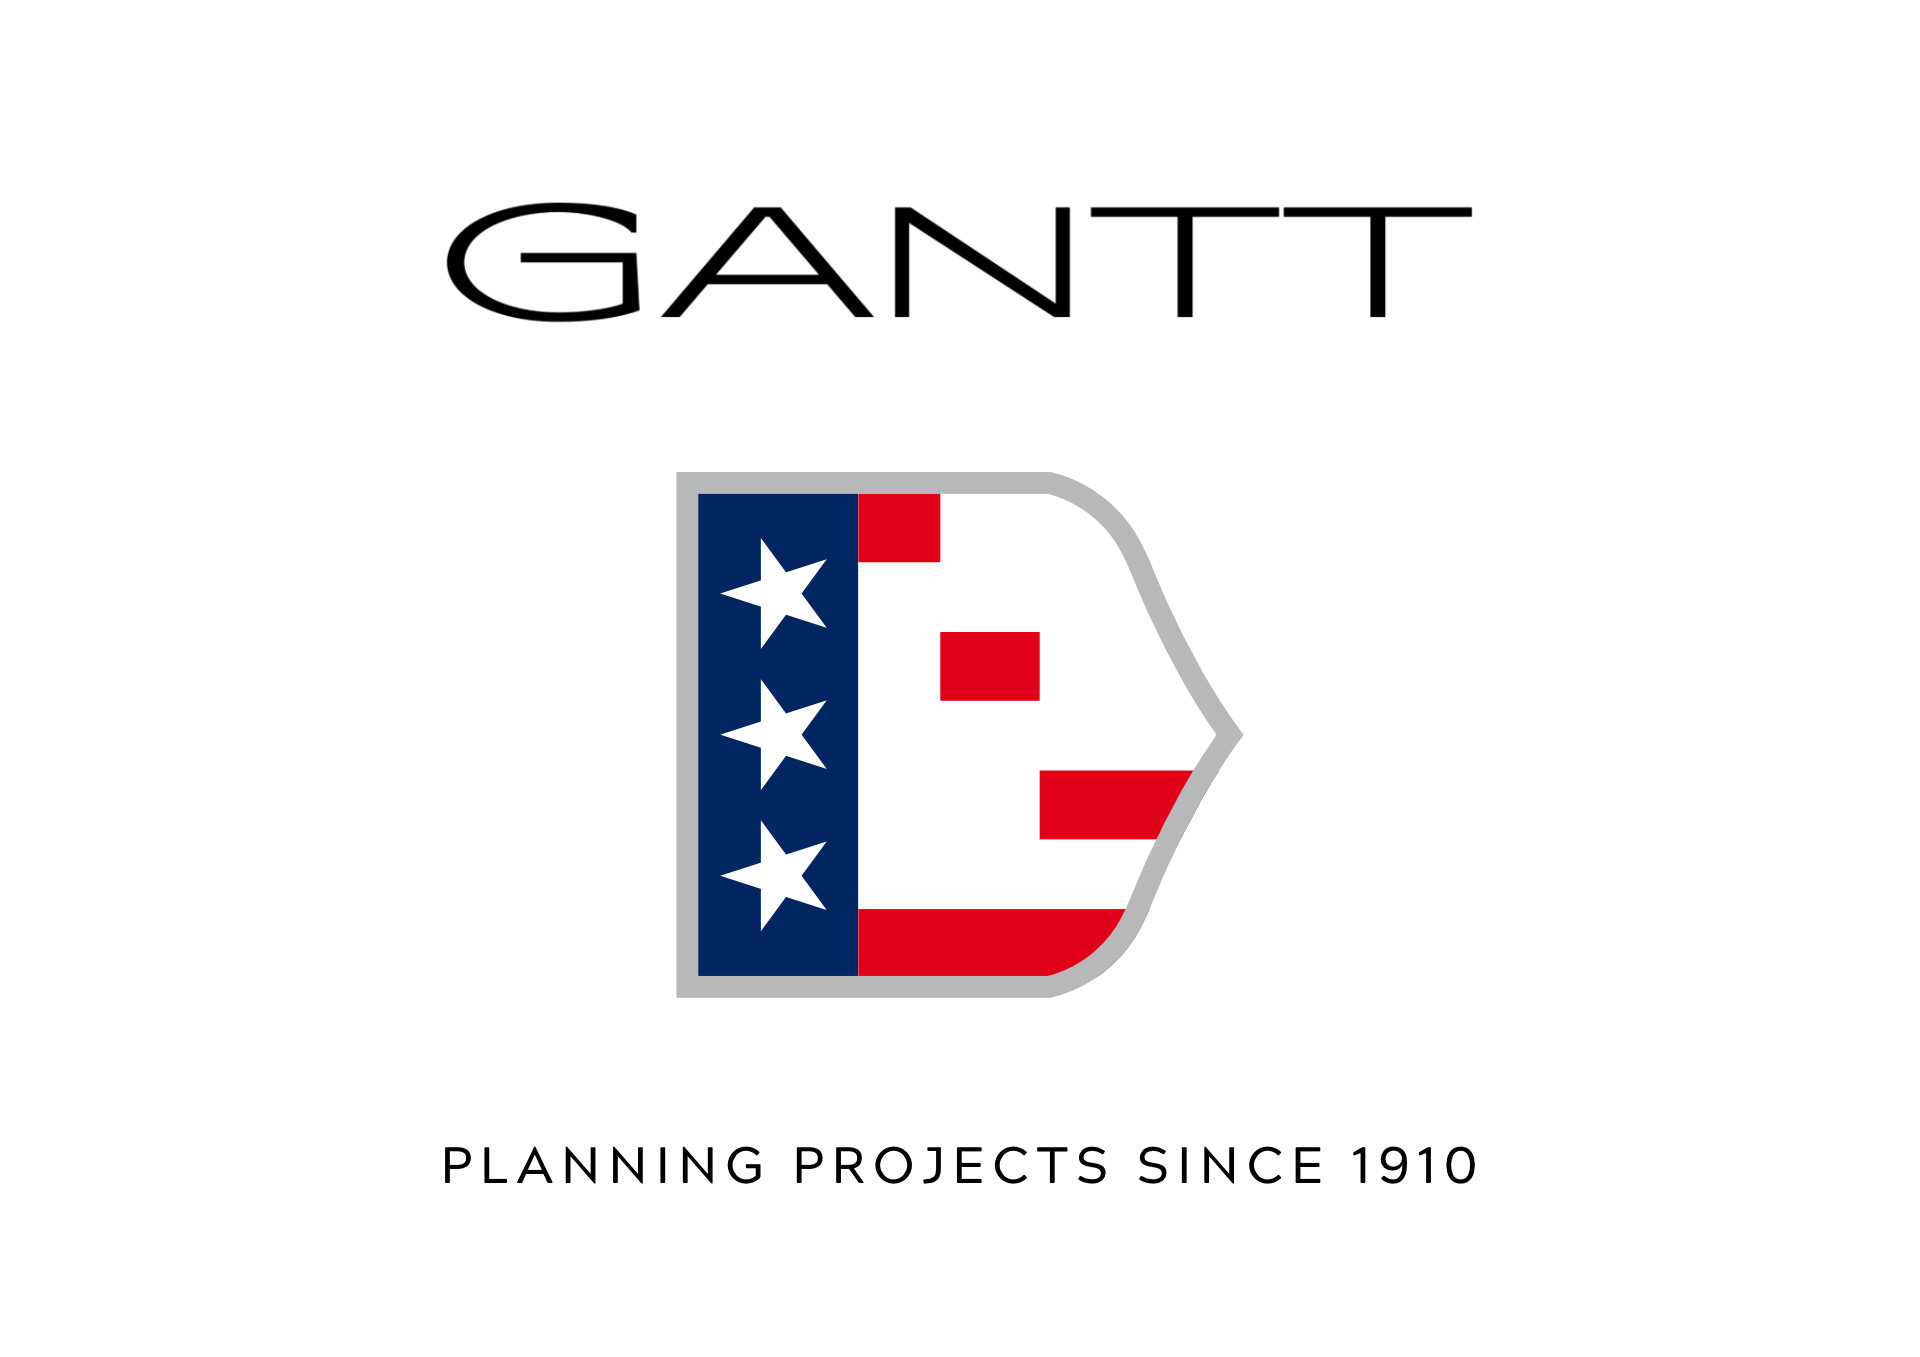 The GANT logotype rotated 90 degrees with the stripes drawn to indicate a gantt chart